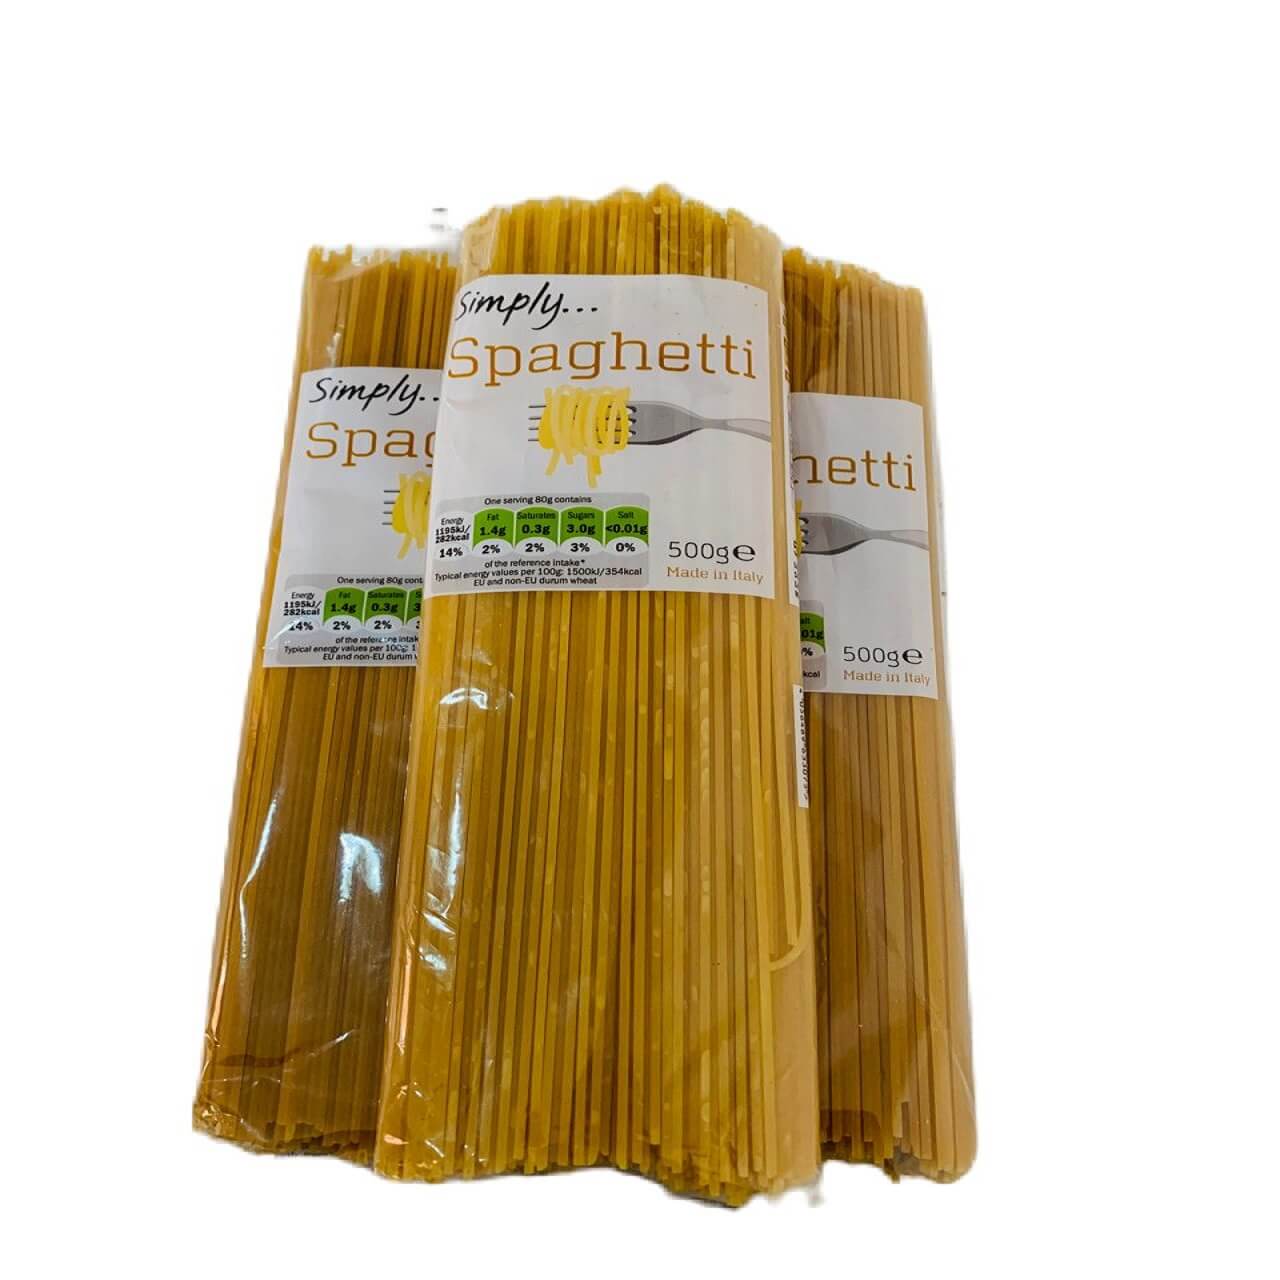 3 sachets of 500g of simply spaghetti